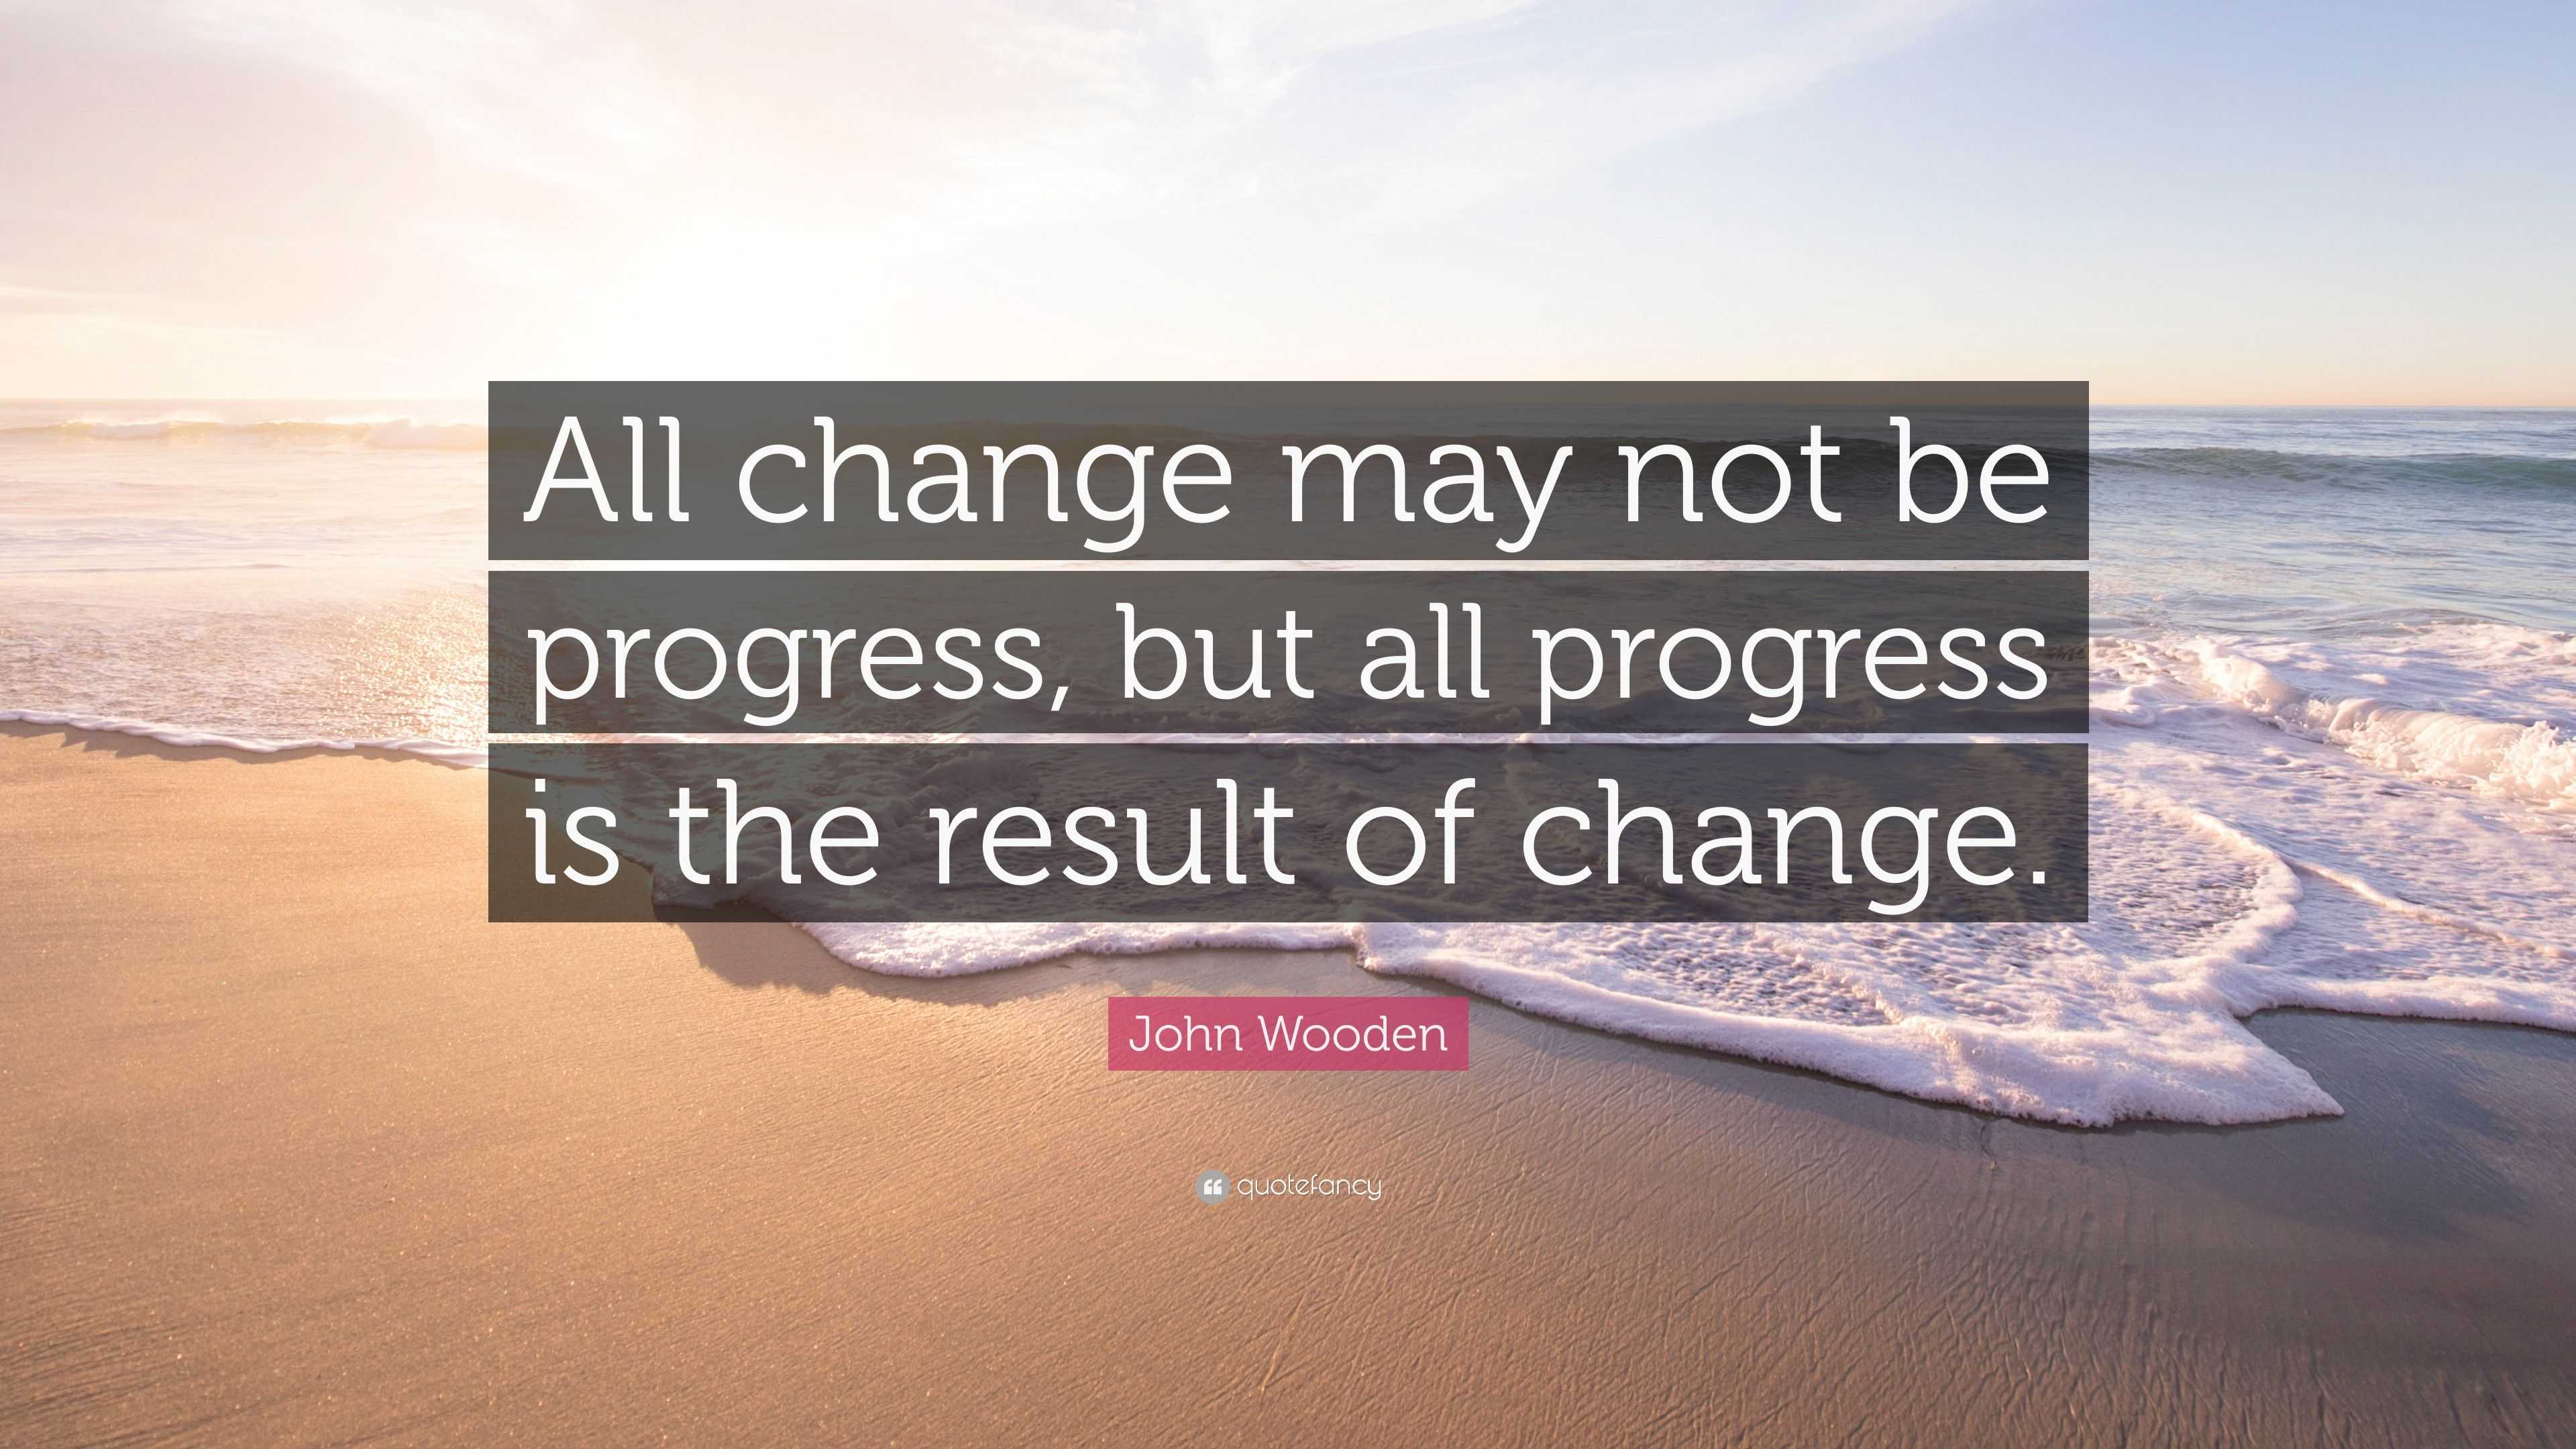 John Wooden Quote “All change may not be progress, but